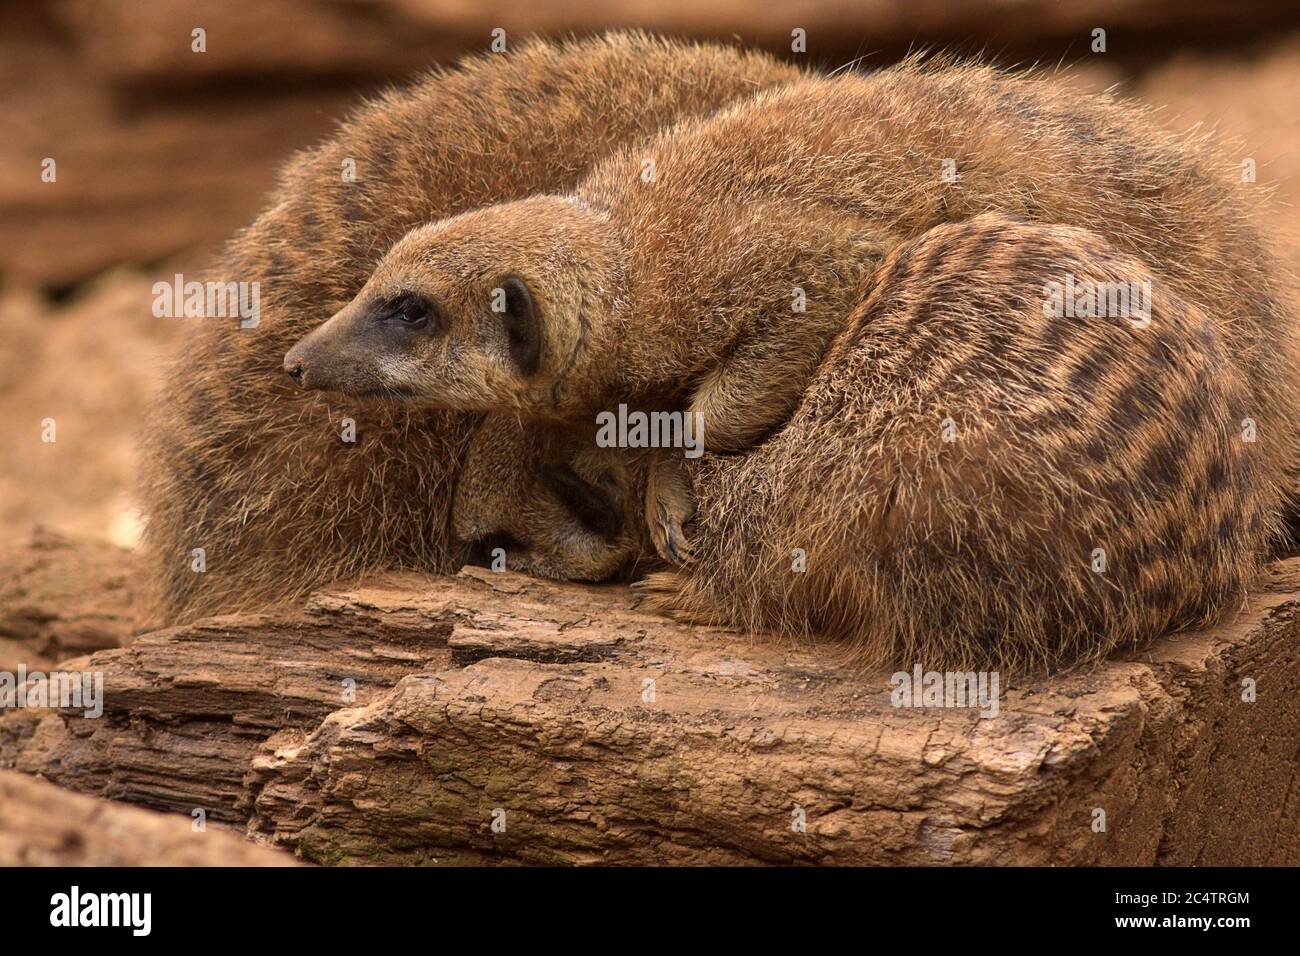 A sleepy pack of Meerkats at Chester Zoo in northwest England. A rocky, desert-like habitat emulates their native southern Africa. Stock Photo